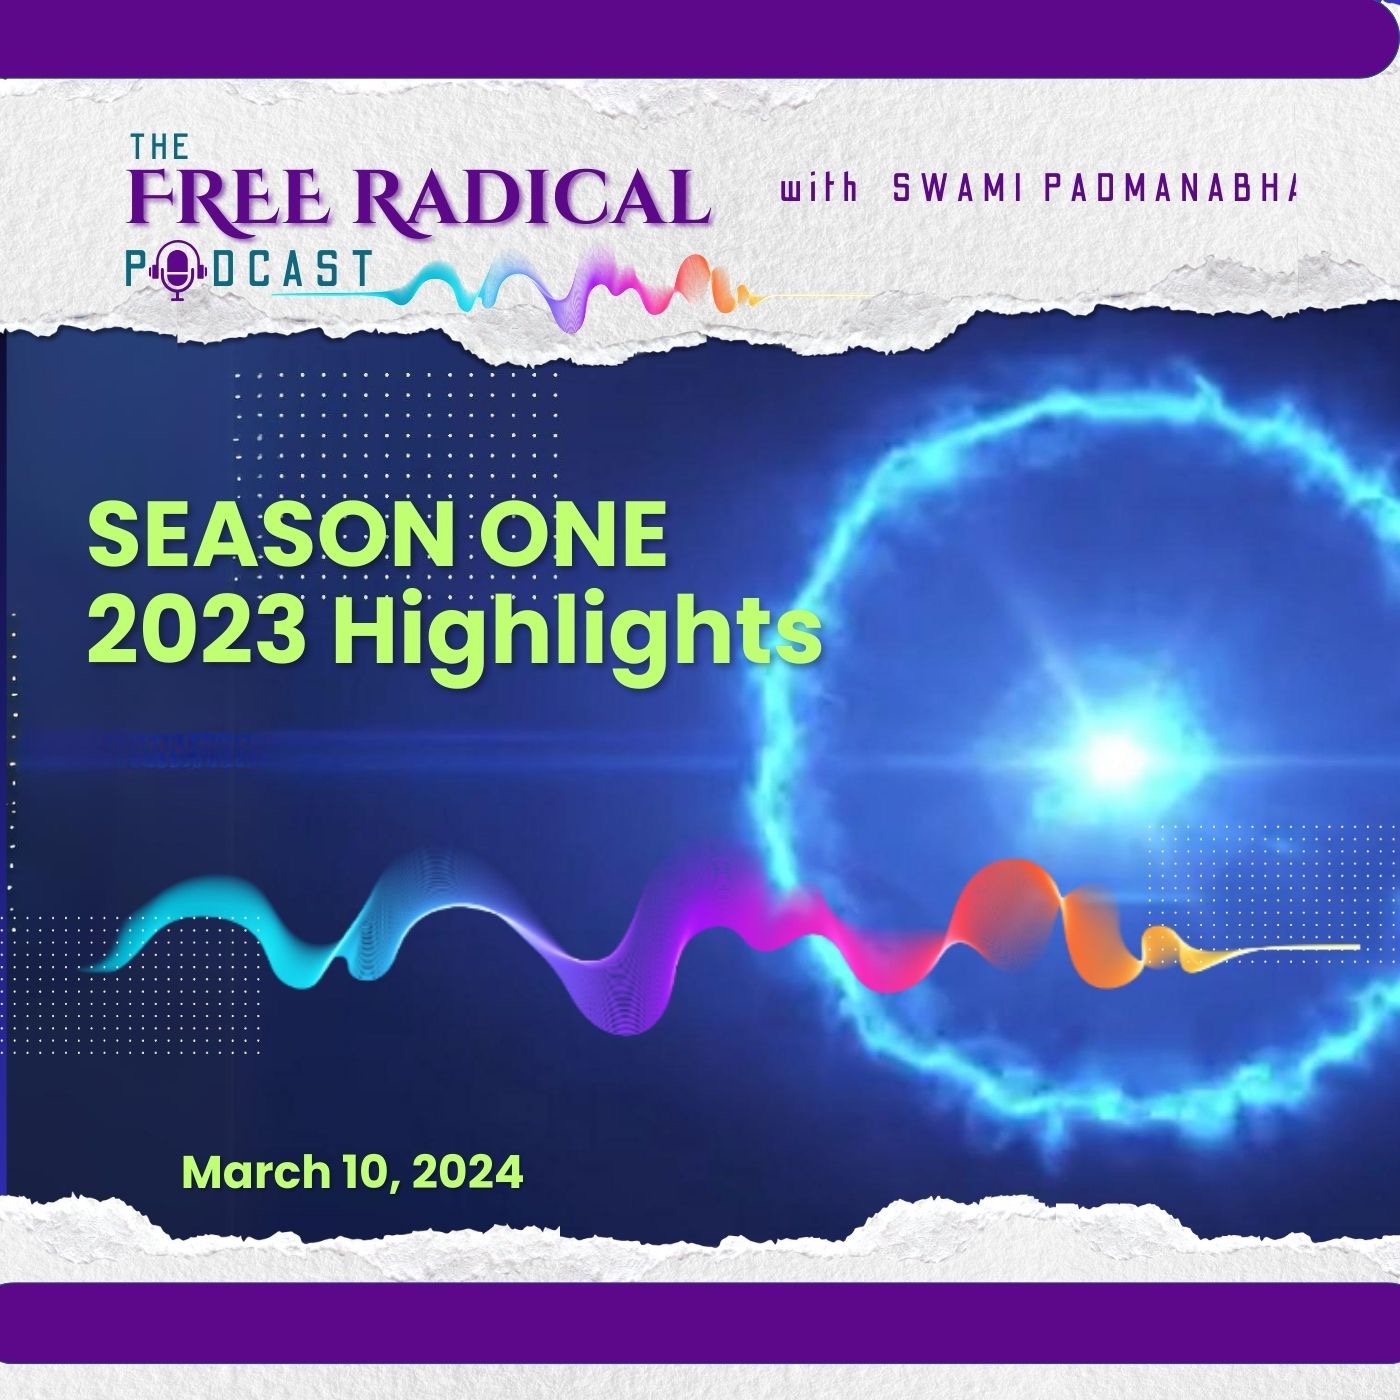 The Free Radical Podcast HIGHLIGHTS of 2023